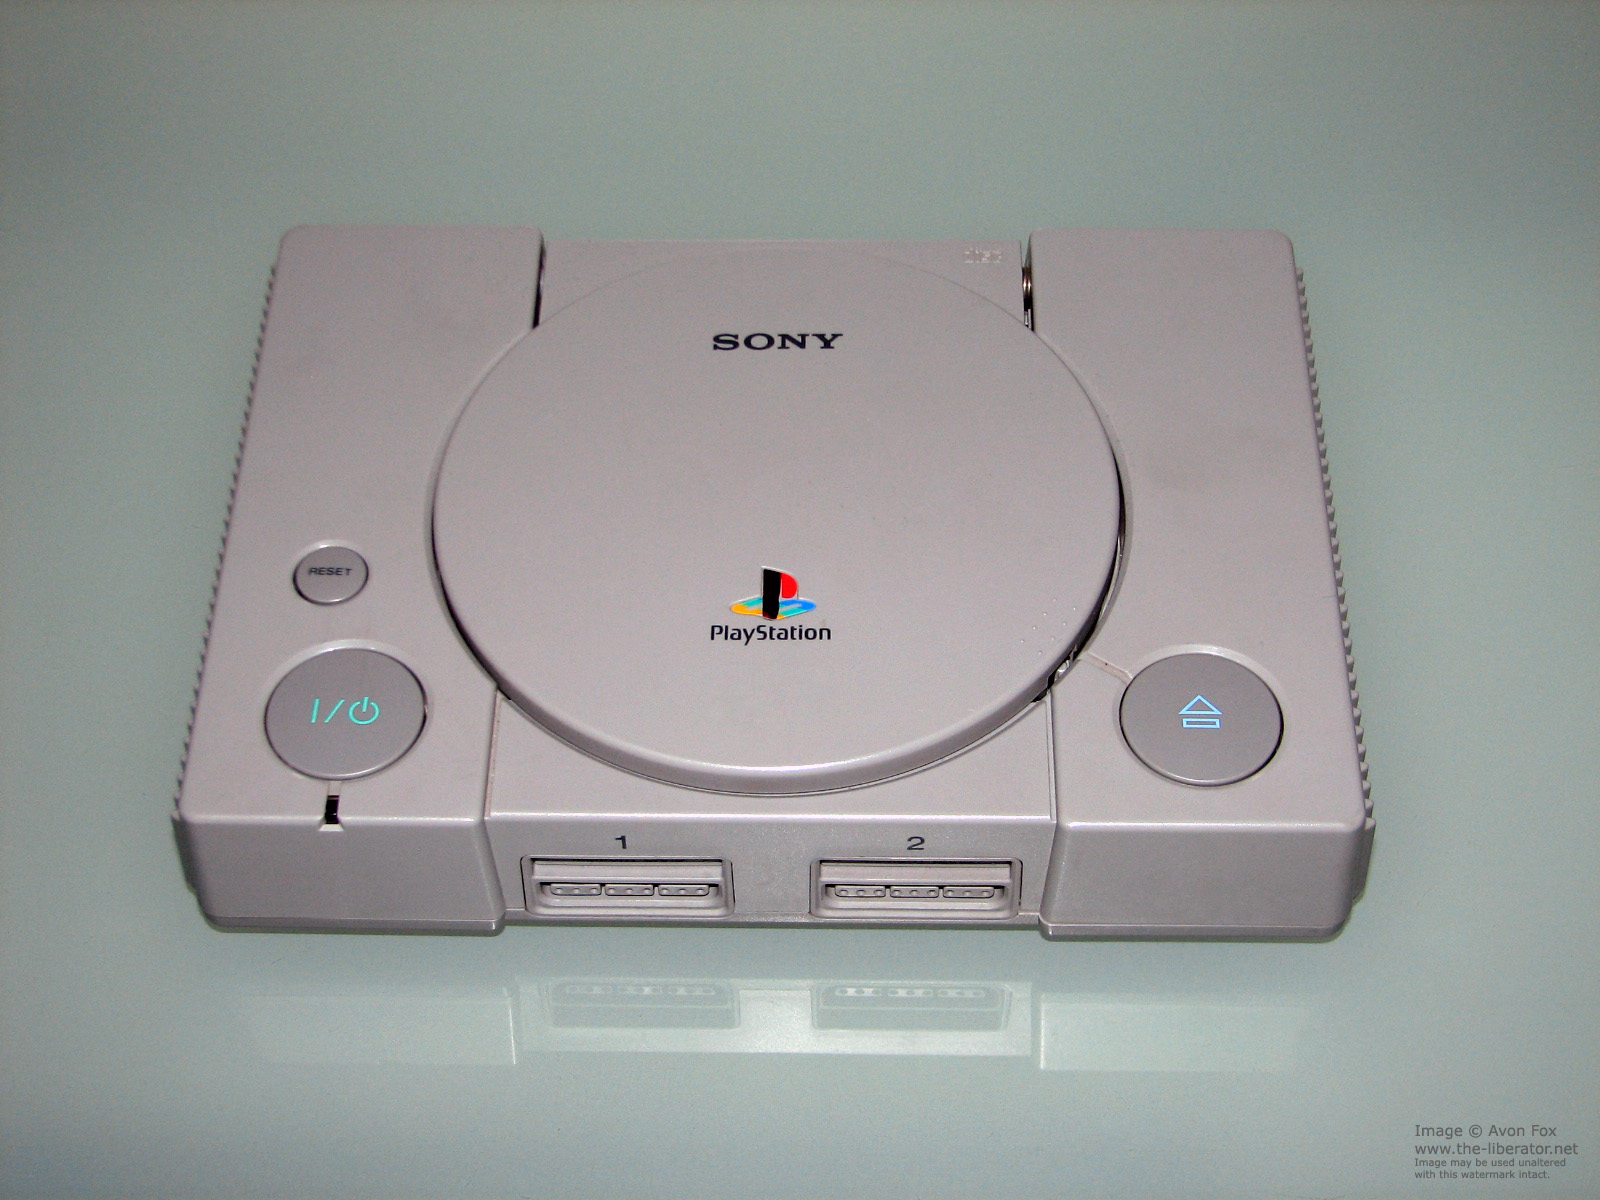 Sony PlayStation Model SCPH-7502